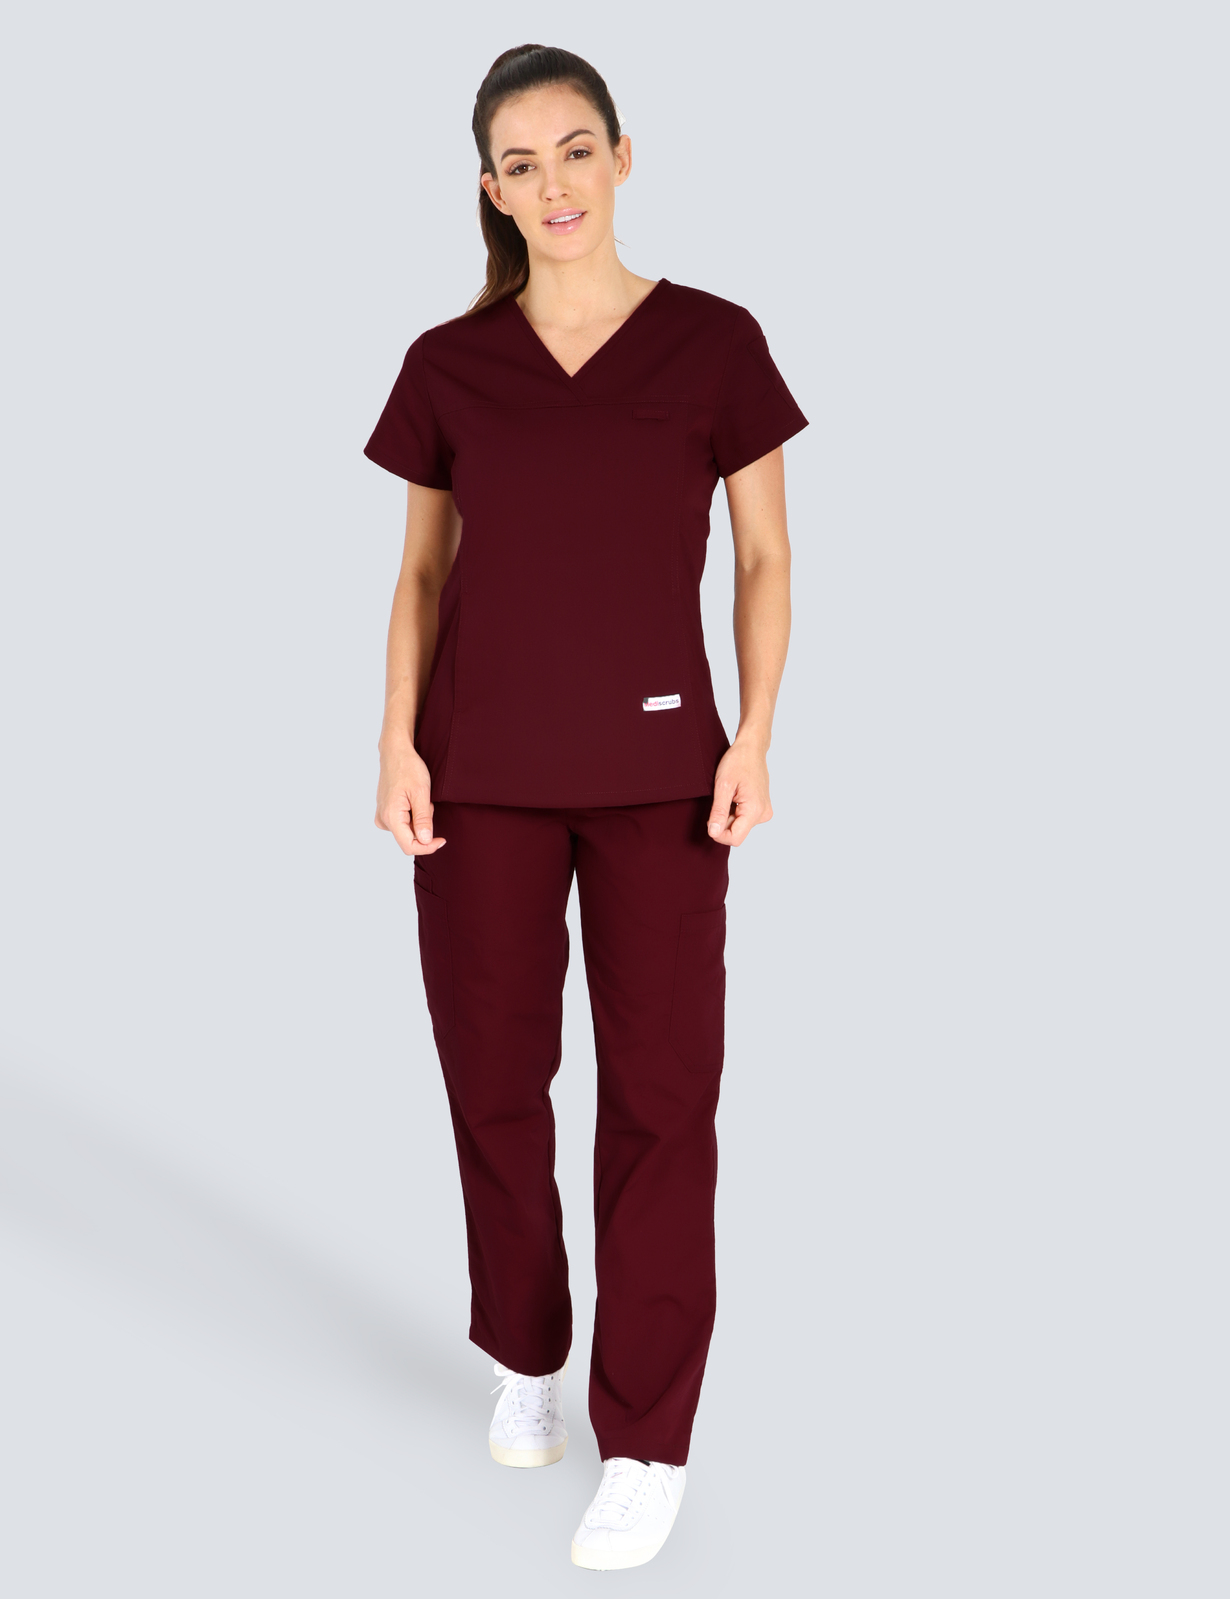 Nambour Hospital - Nursing Practitioner (Women's Fit Solid Scrub Top and Cargo Pants in Burgundy incl Logos)